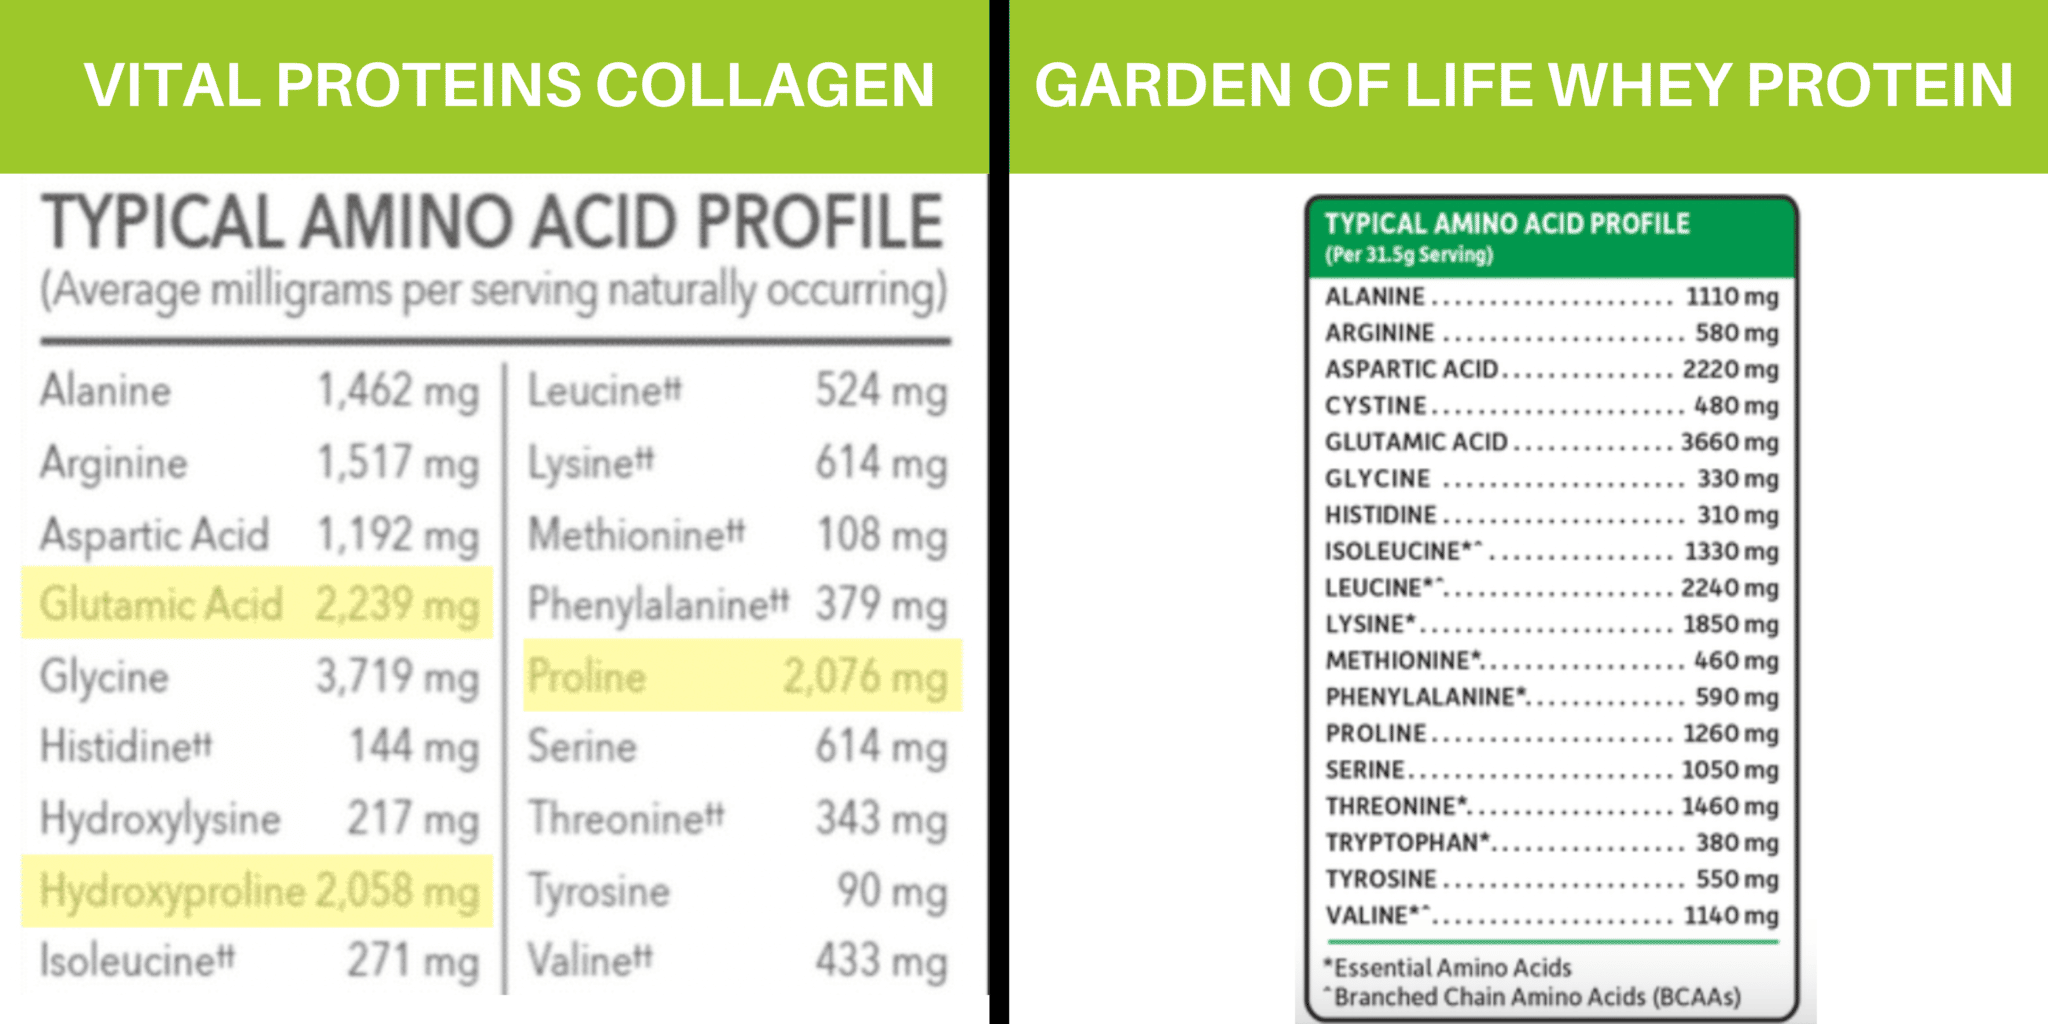 Vital Protein Collagen vs. garden of life whey protein and their amino acid profiles.